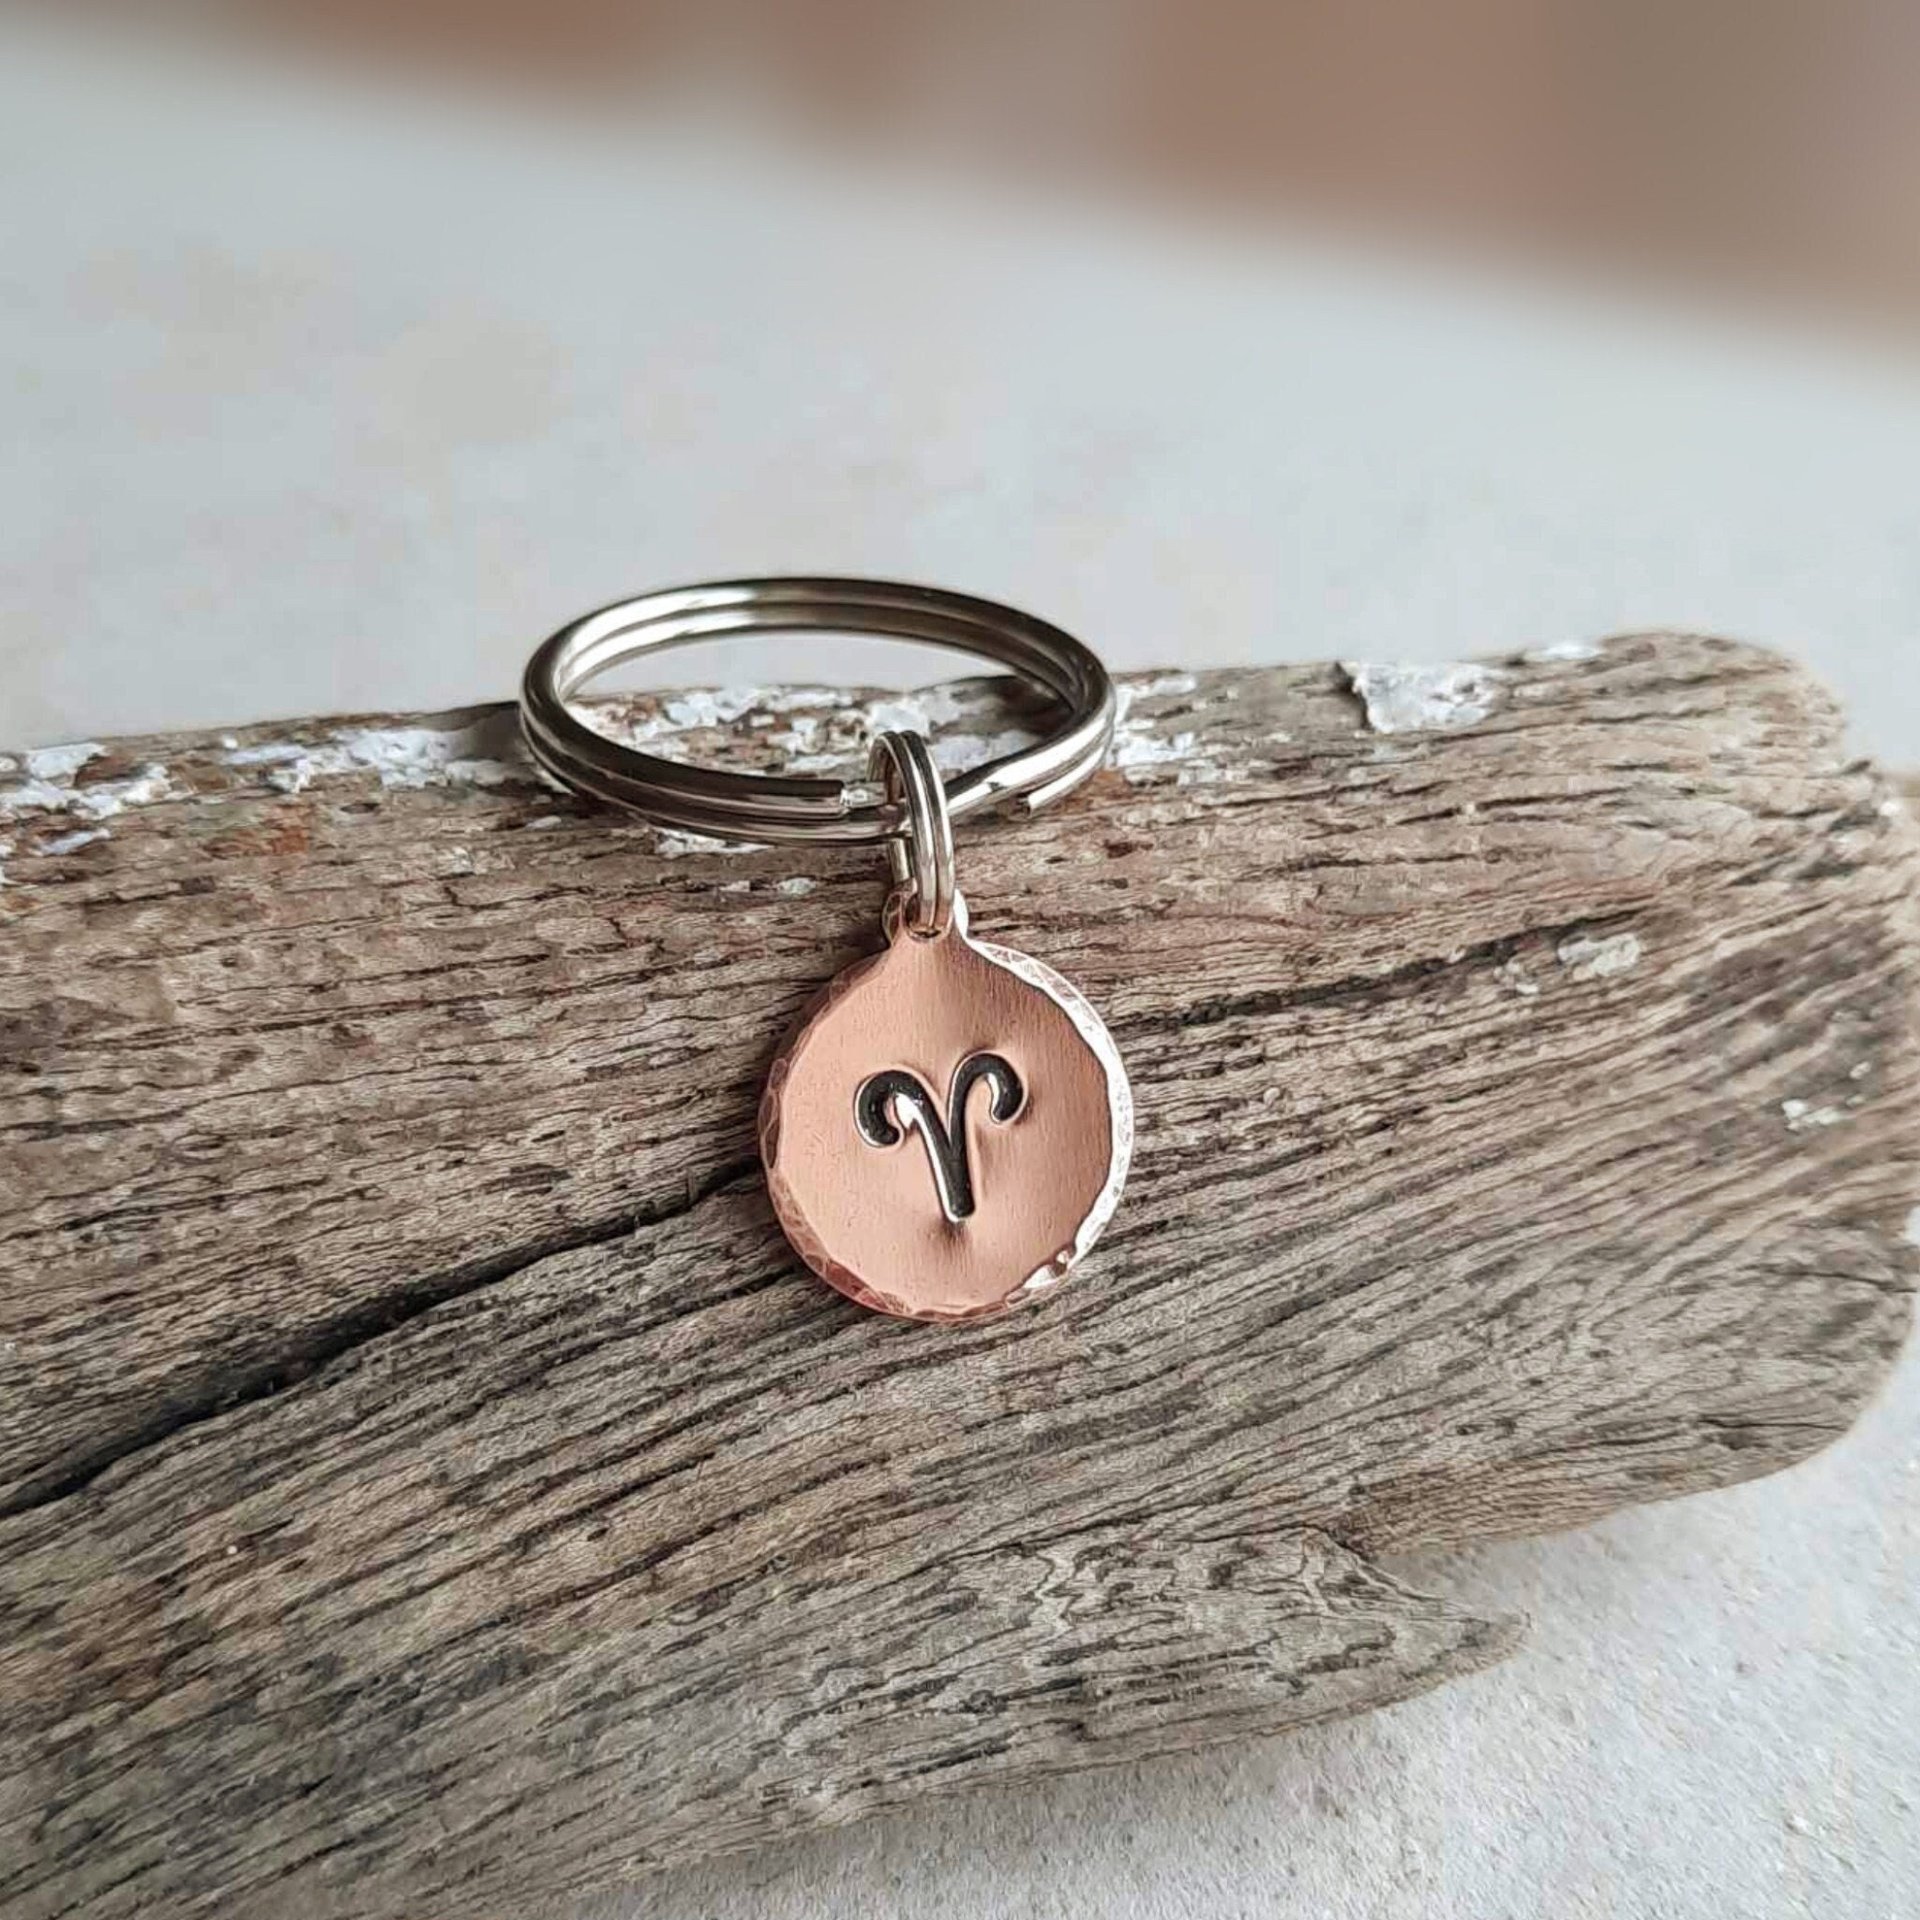 Hand stamped copper Aries zodiac symbol key ring, handmade by The Tiny Tree Frog Jewellery